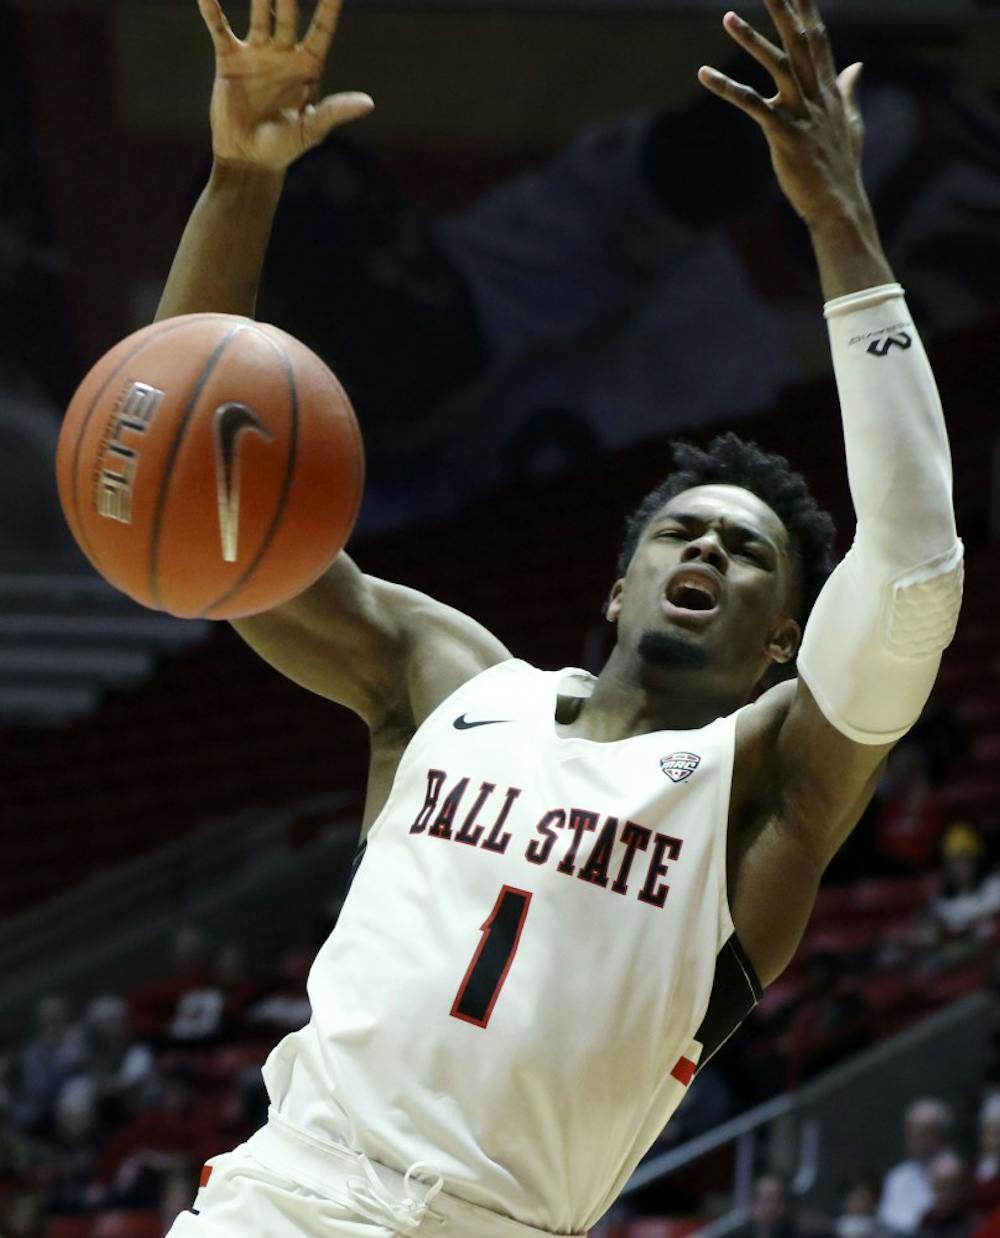 <p>Ball State redshirt junior guard K.J. Walton reacts to getting fouled during the Cardinals' game against Miami University Jan. 22, 2019 in John E. Worthen Arena. Walton scored 16 points. <strong>Paige Grider, DN</strong></p>